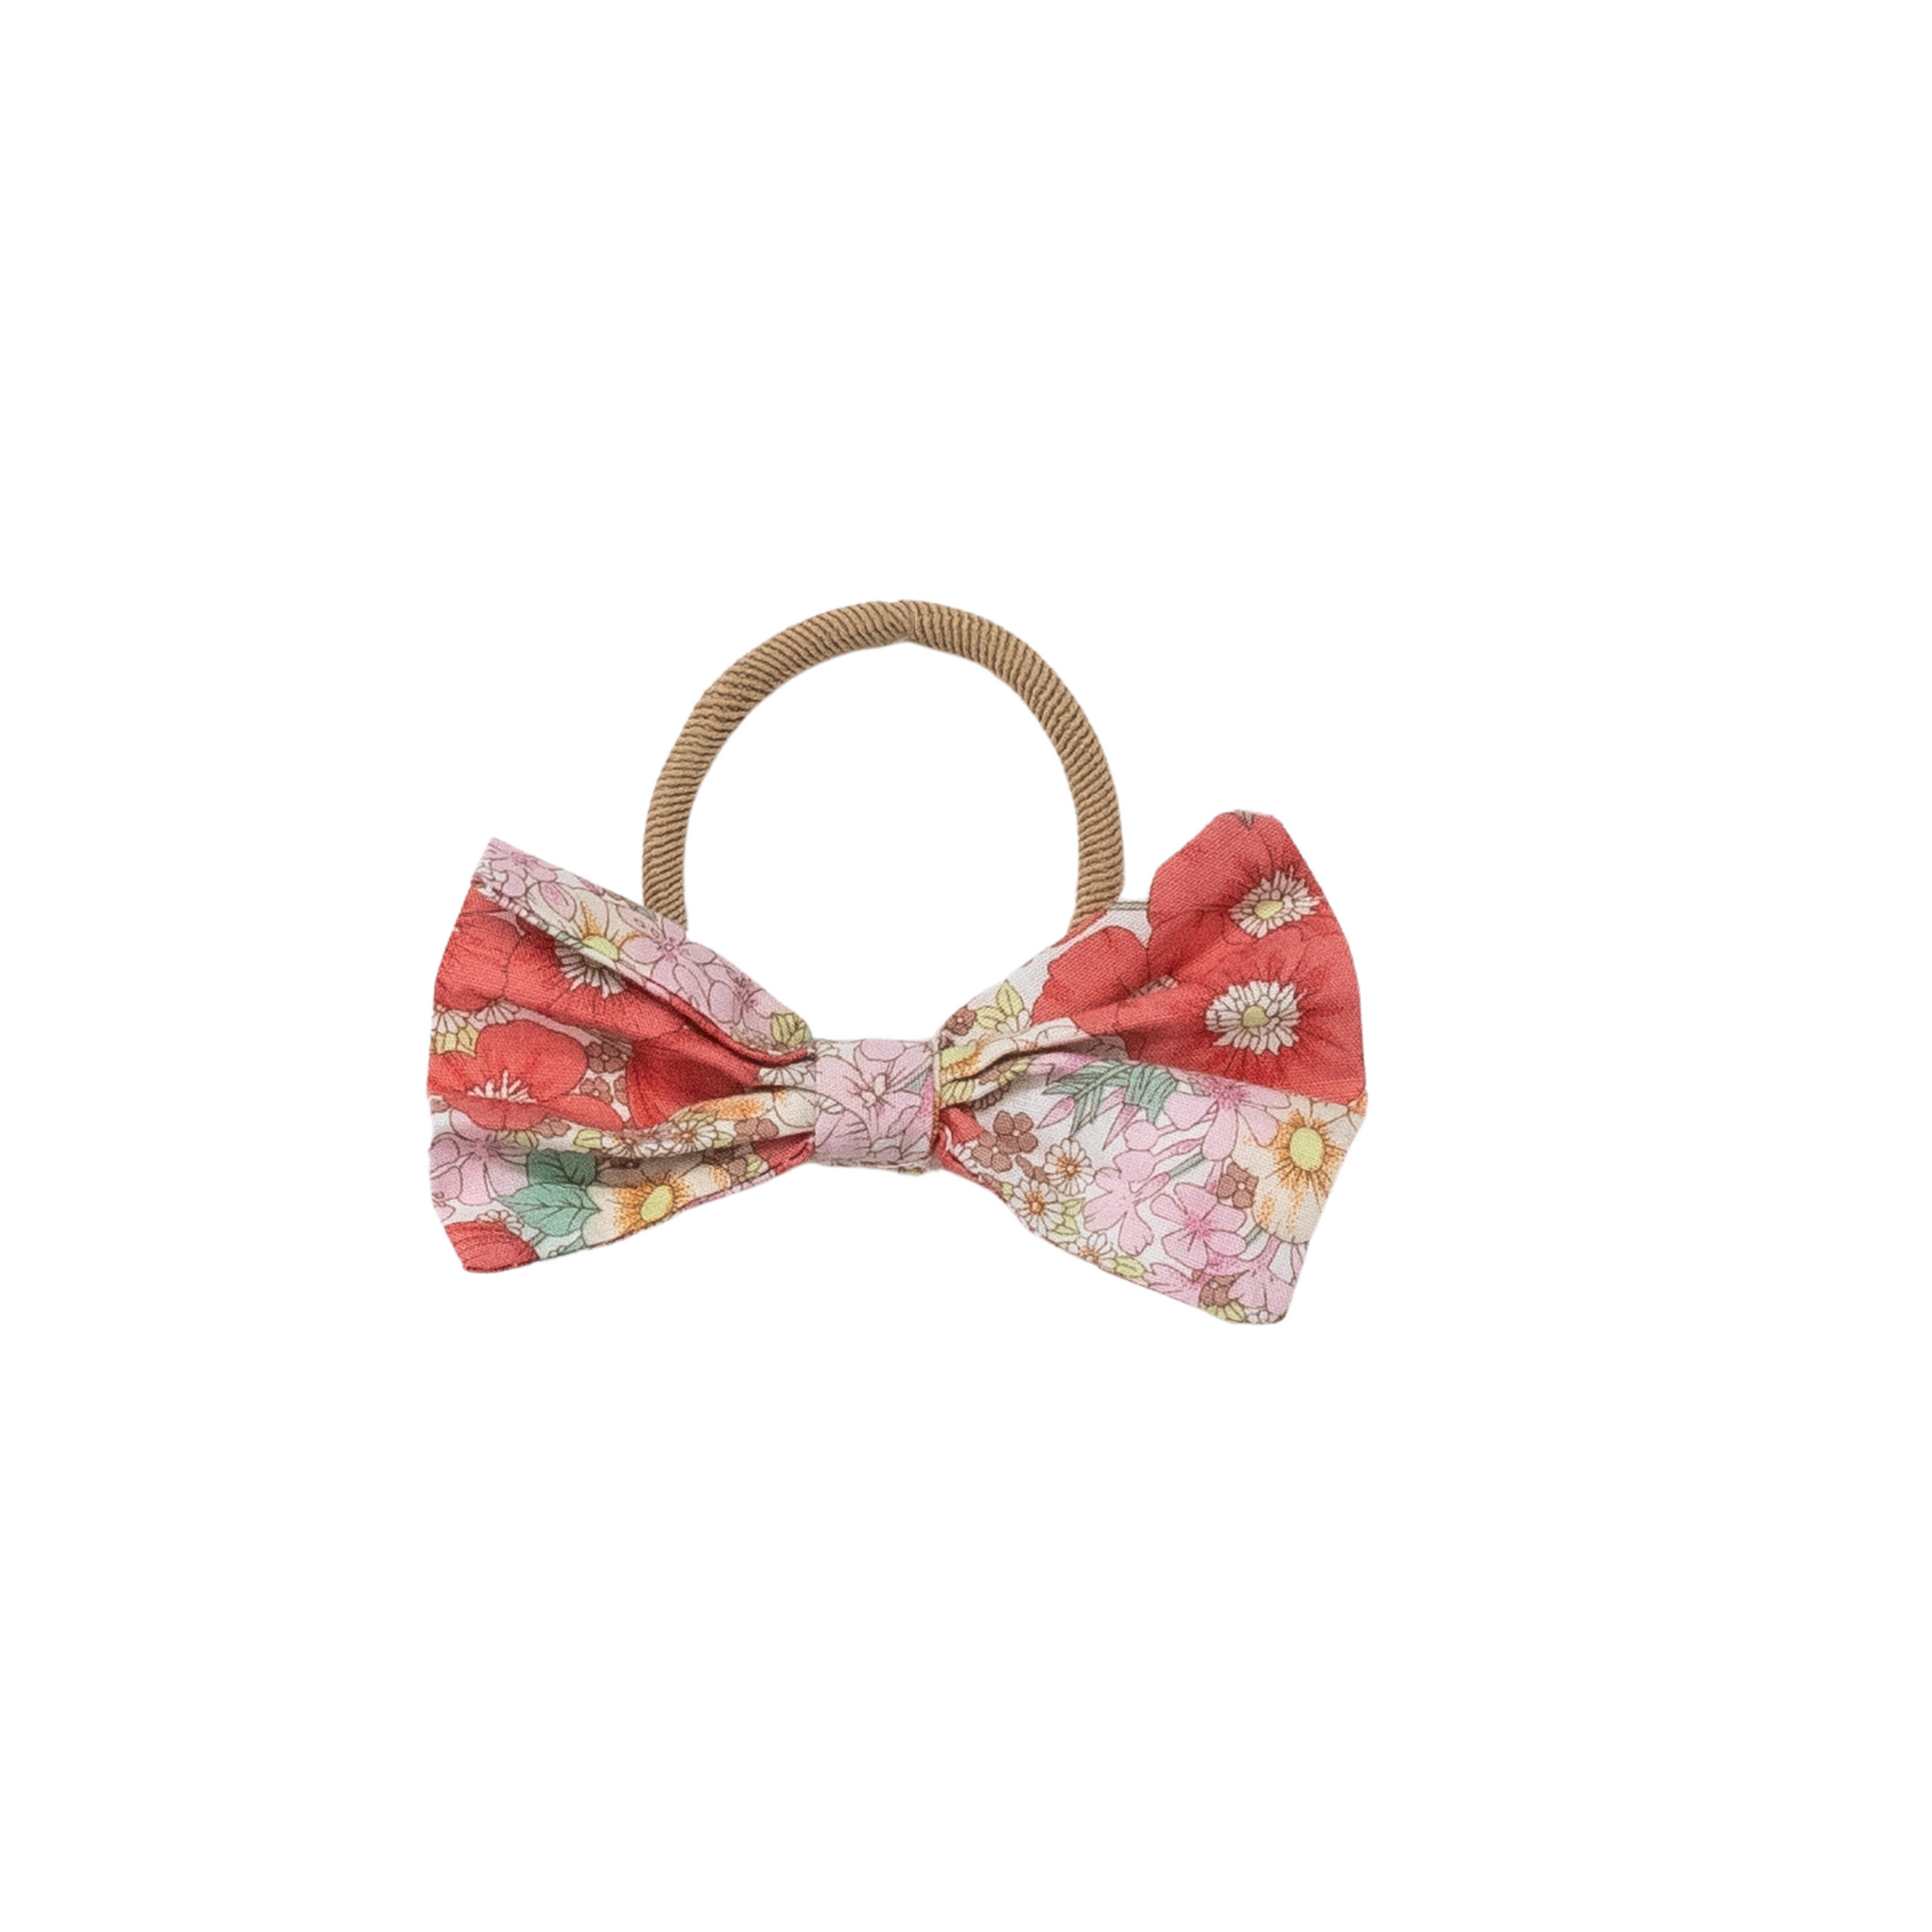 Smox Rox Set of 2 Hair Elastic Bows  - Coral Poppies